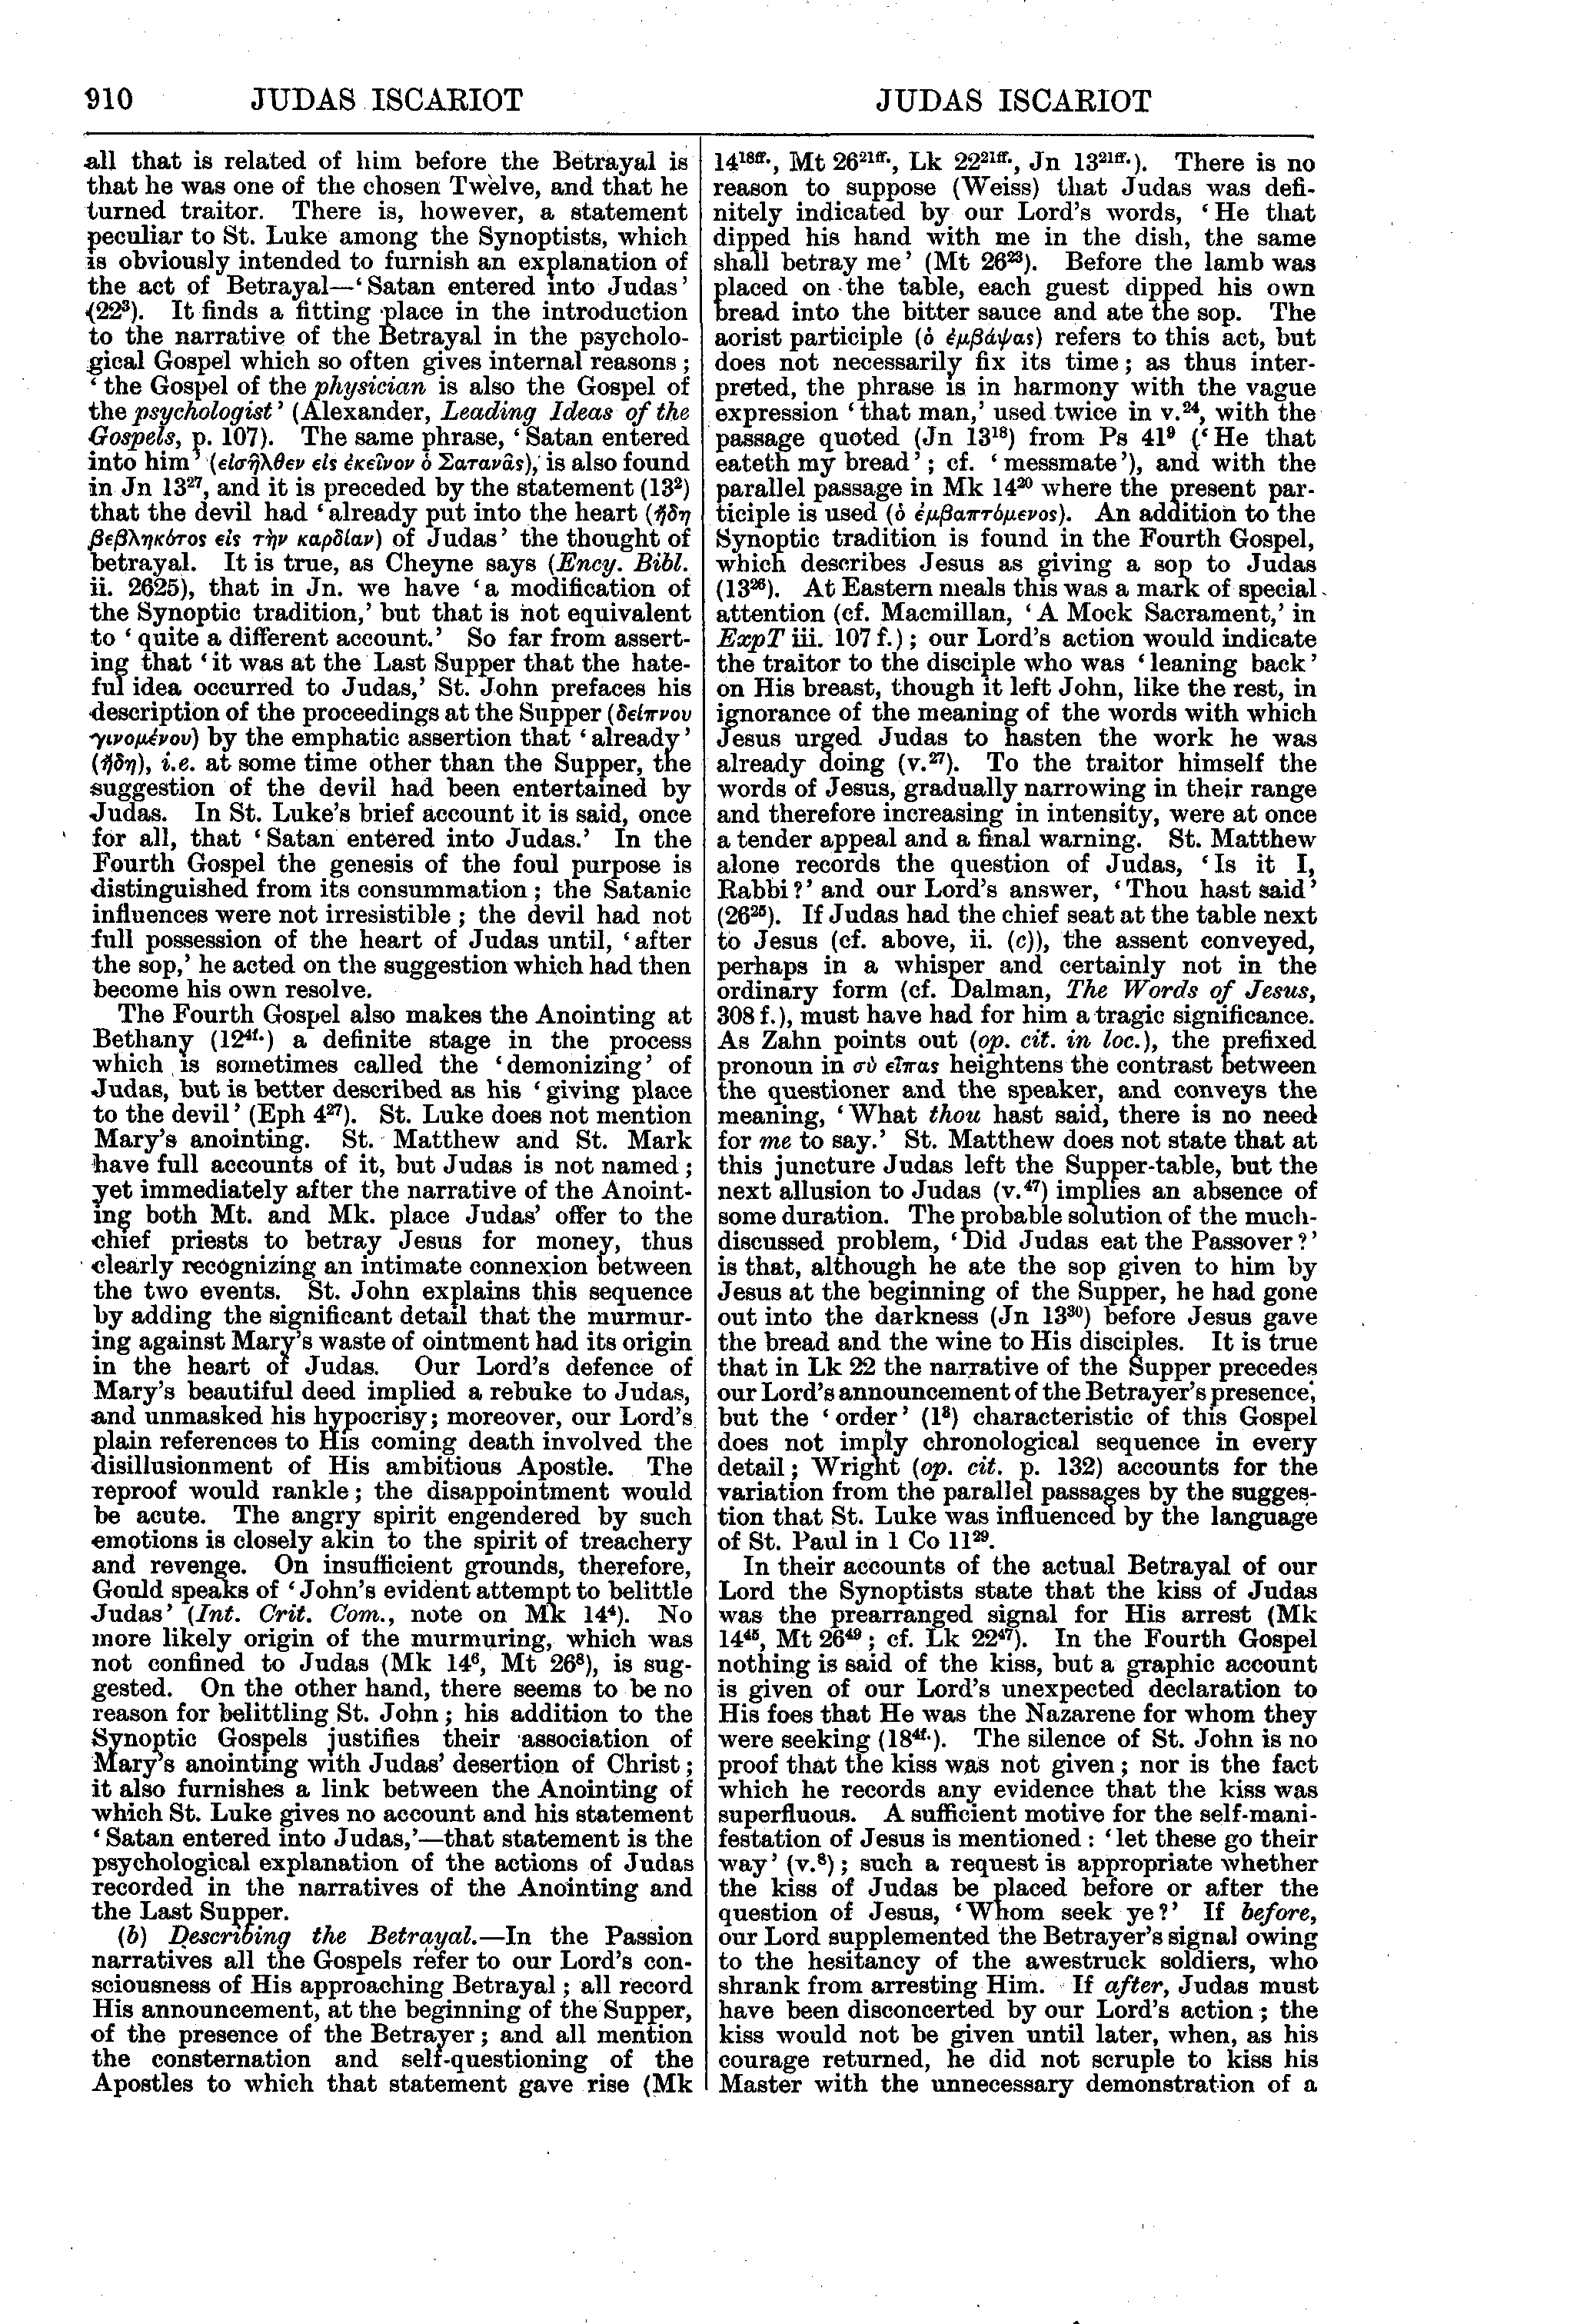 Image of page 910